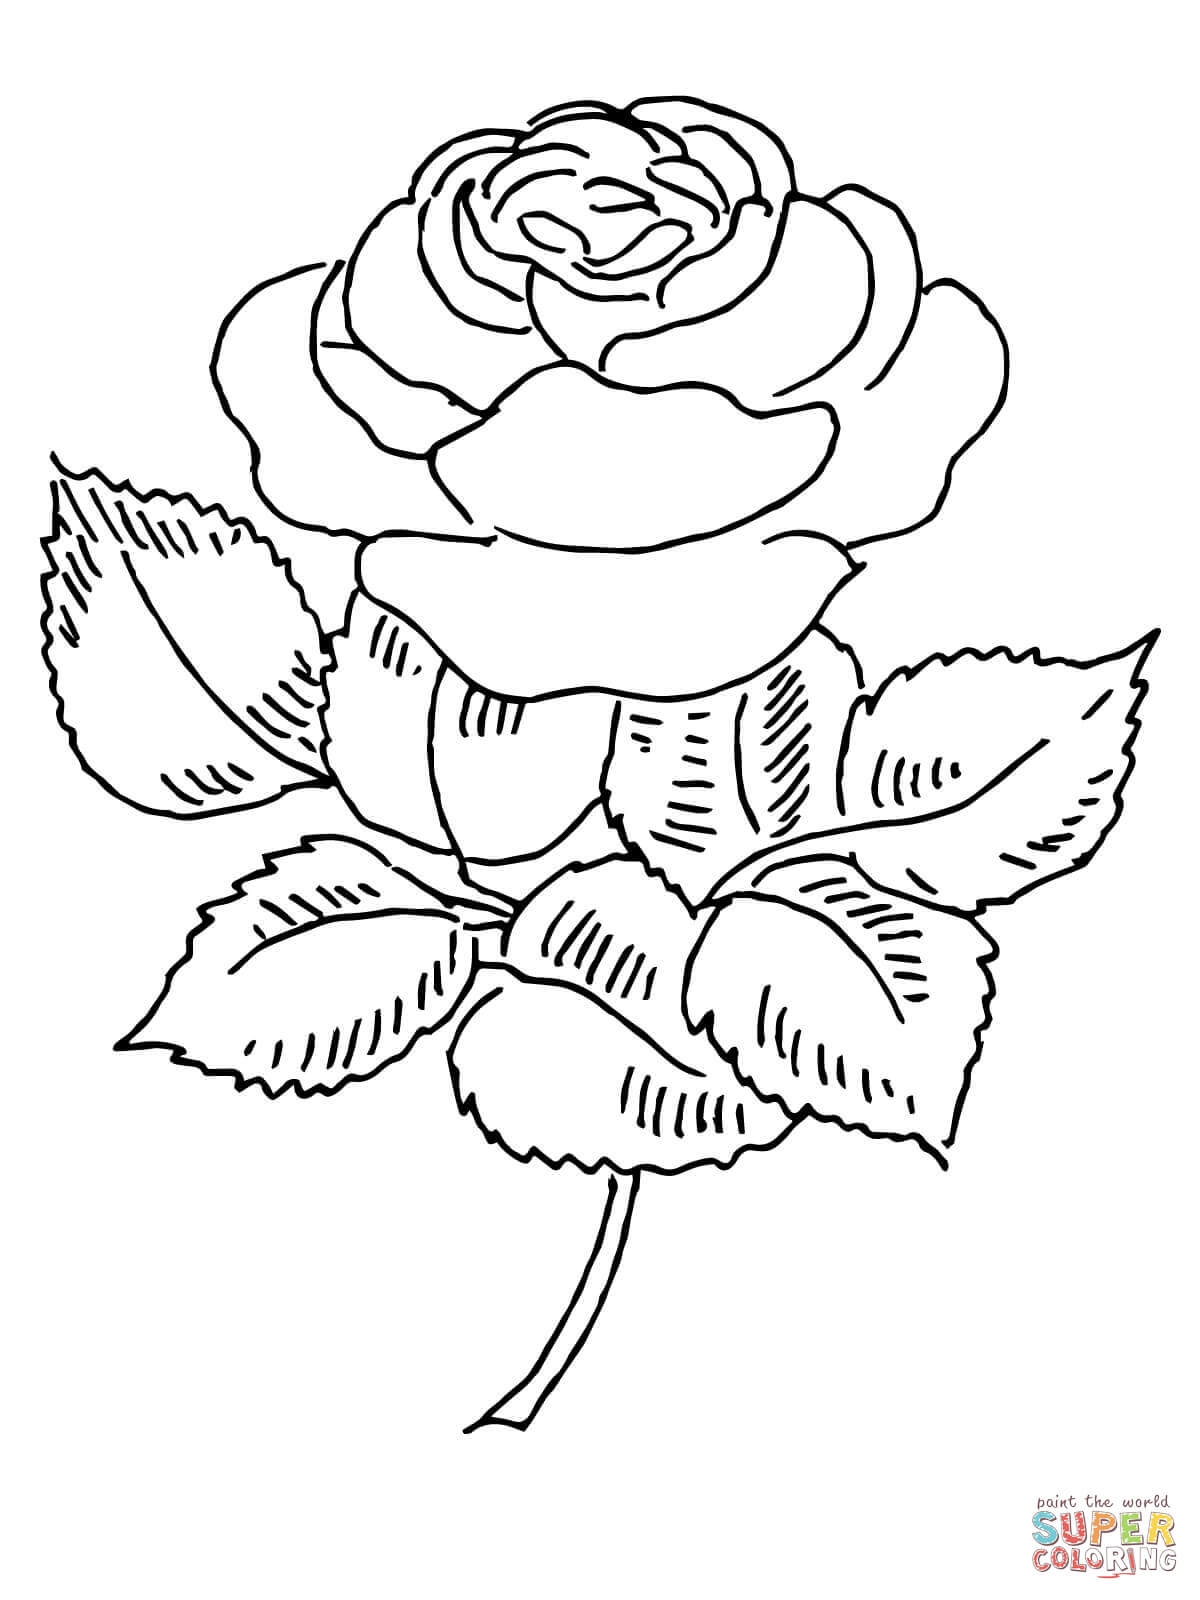 Coloring Pages For Elderly at GetDrawings Free download